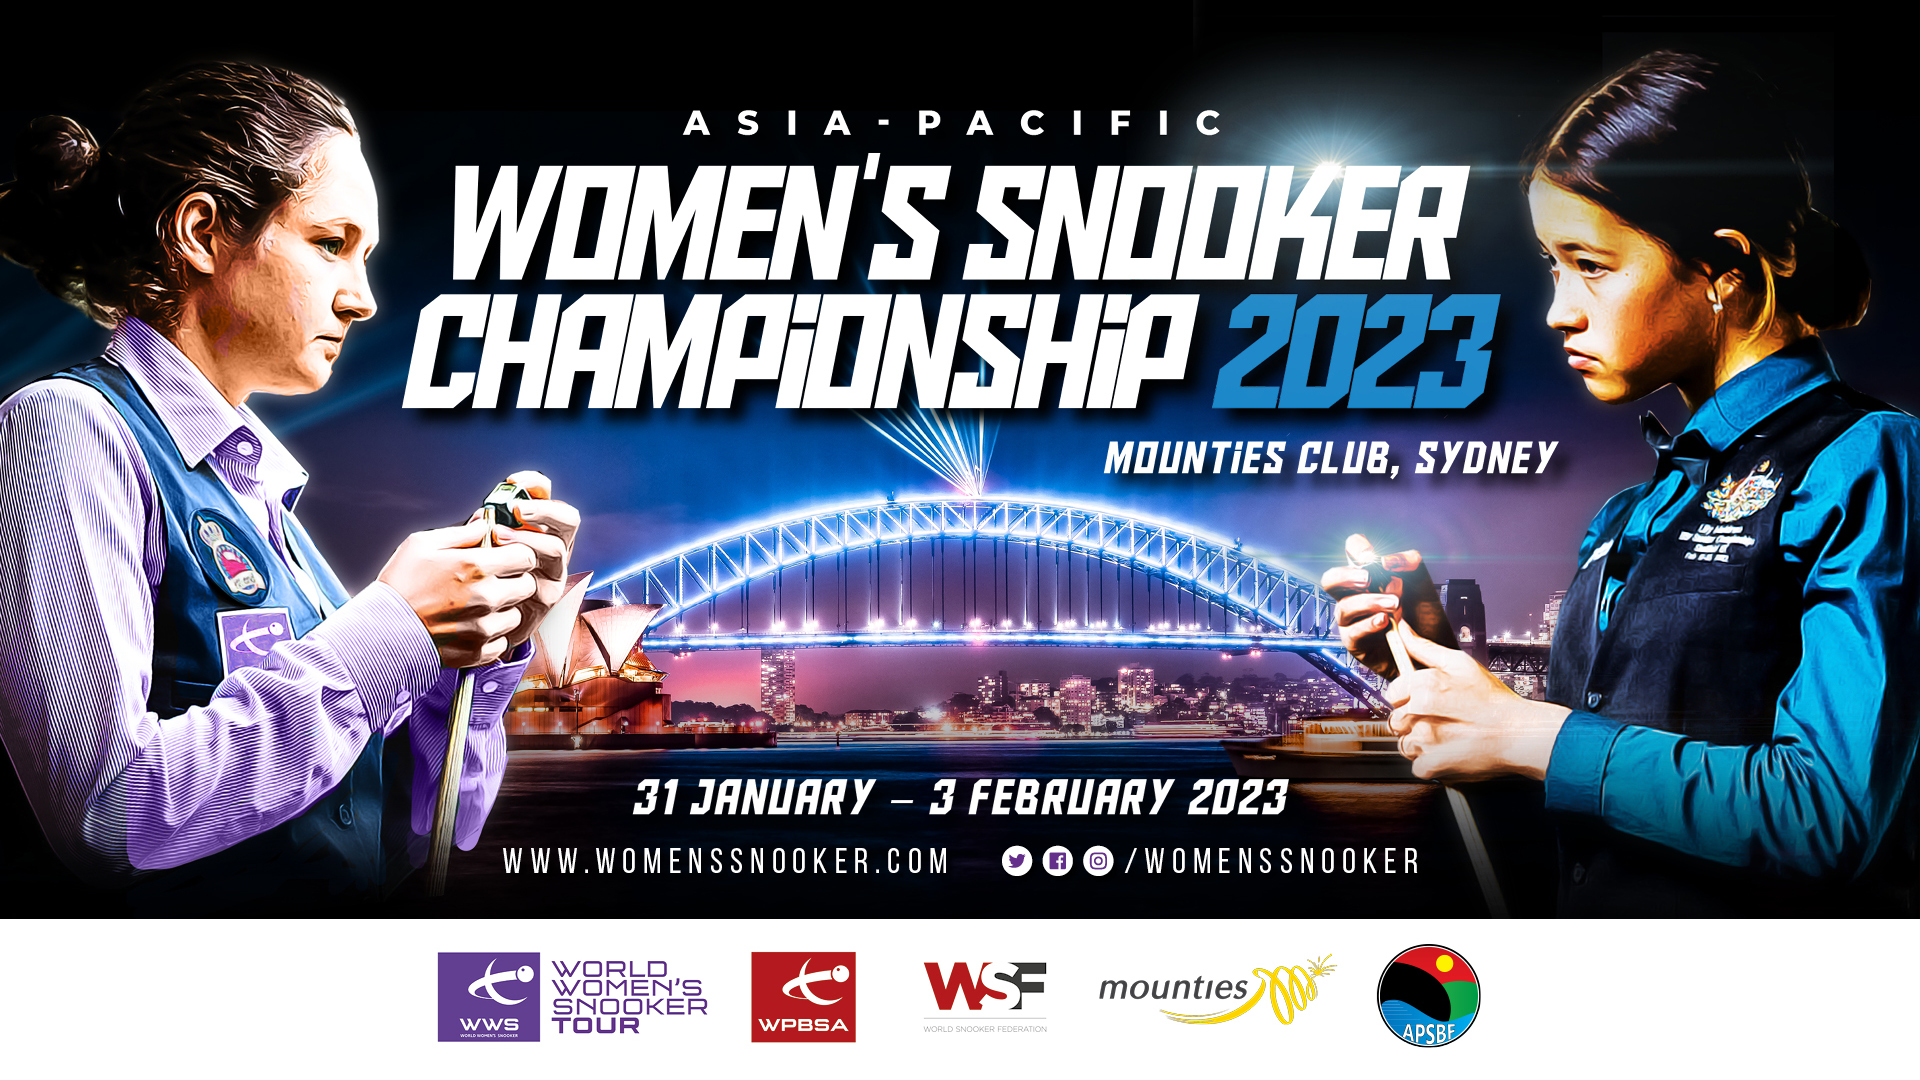 Womens Snooker WWS Asia - Pacific Championship 2023 - Non-Olympic Sports Results Database